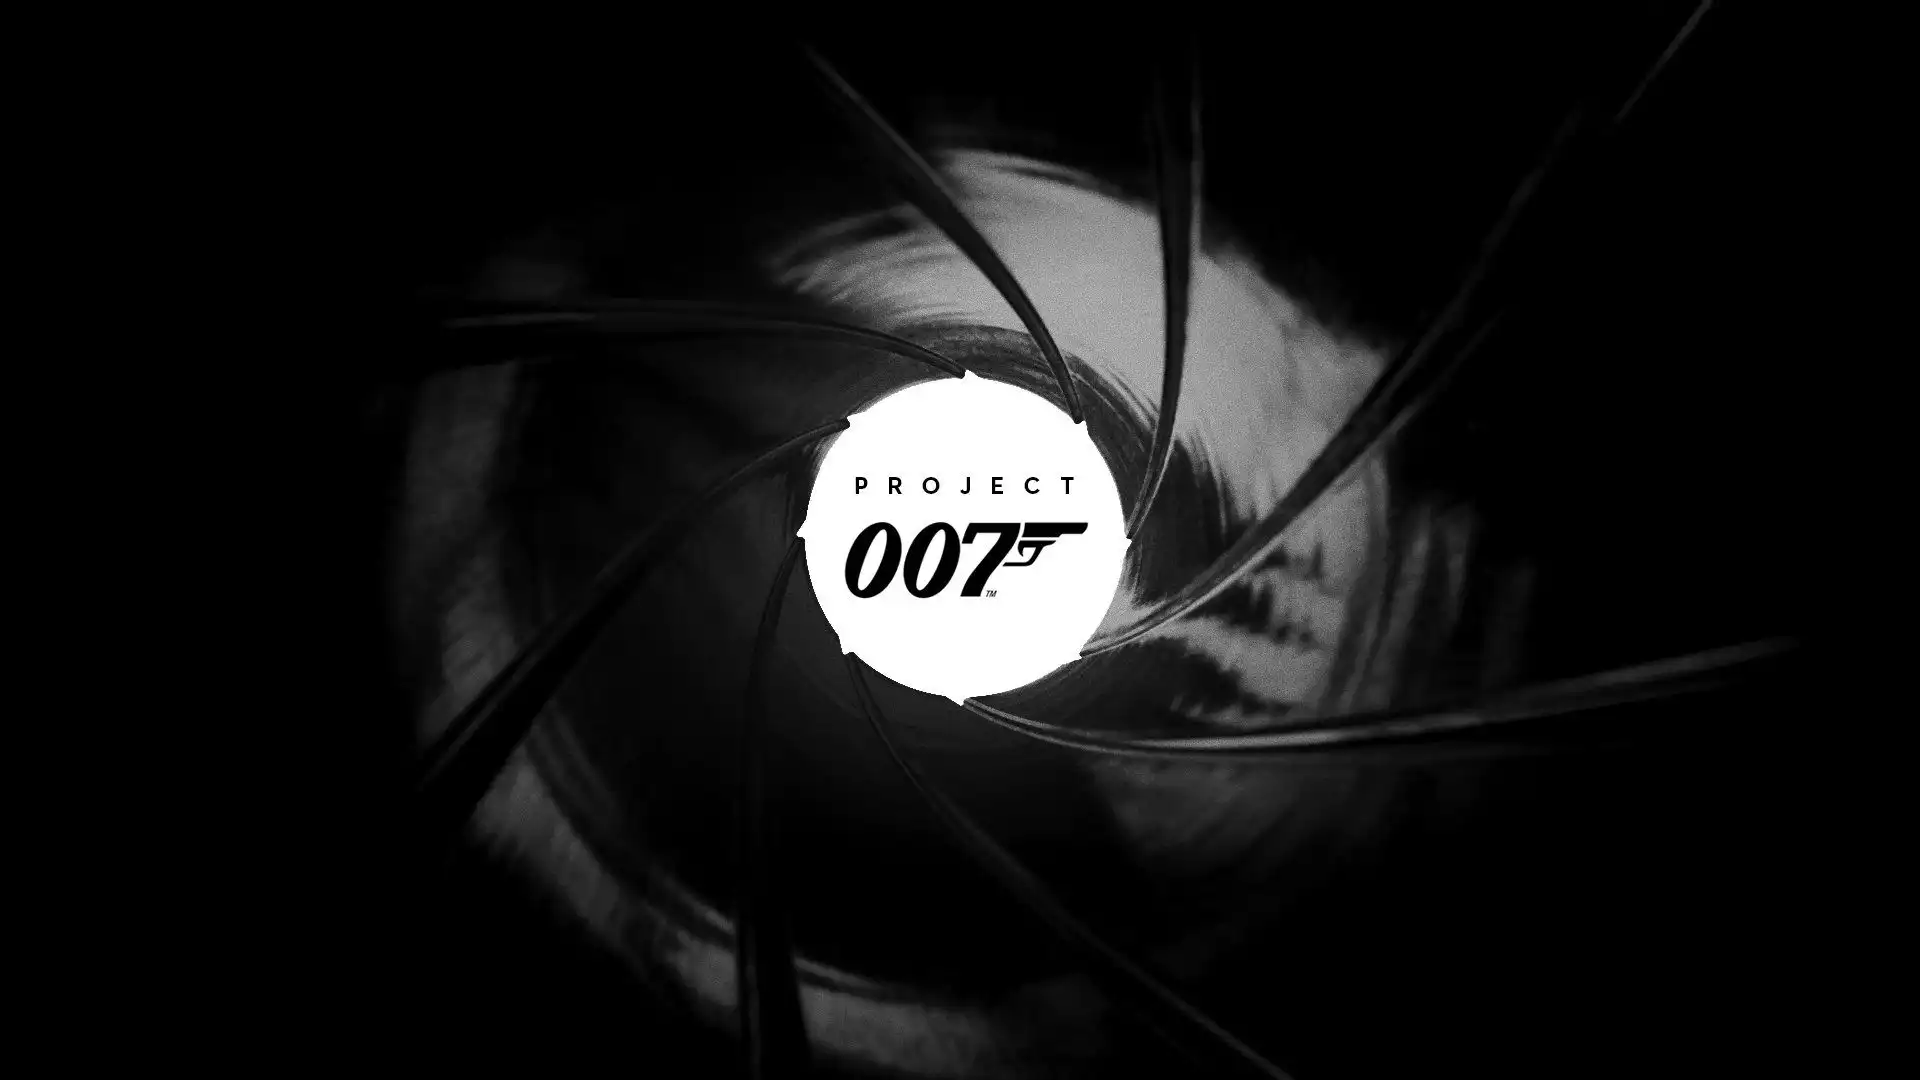 Project 007: James Bond Developer, trailers & everything we know